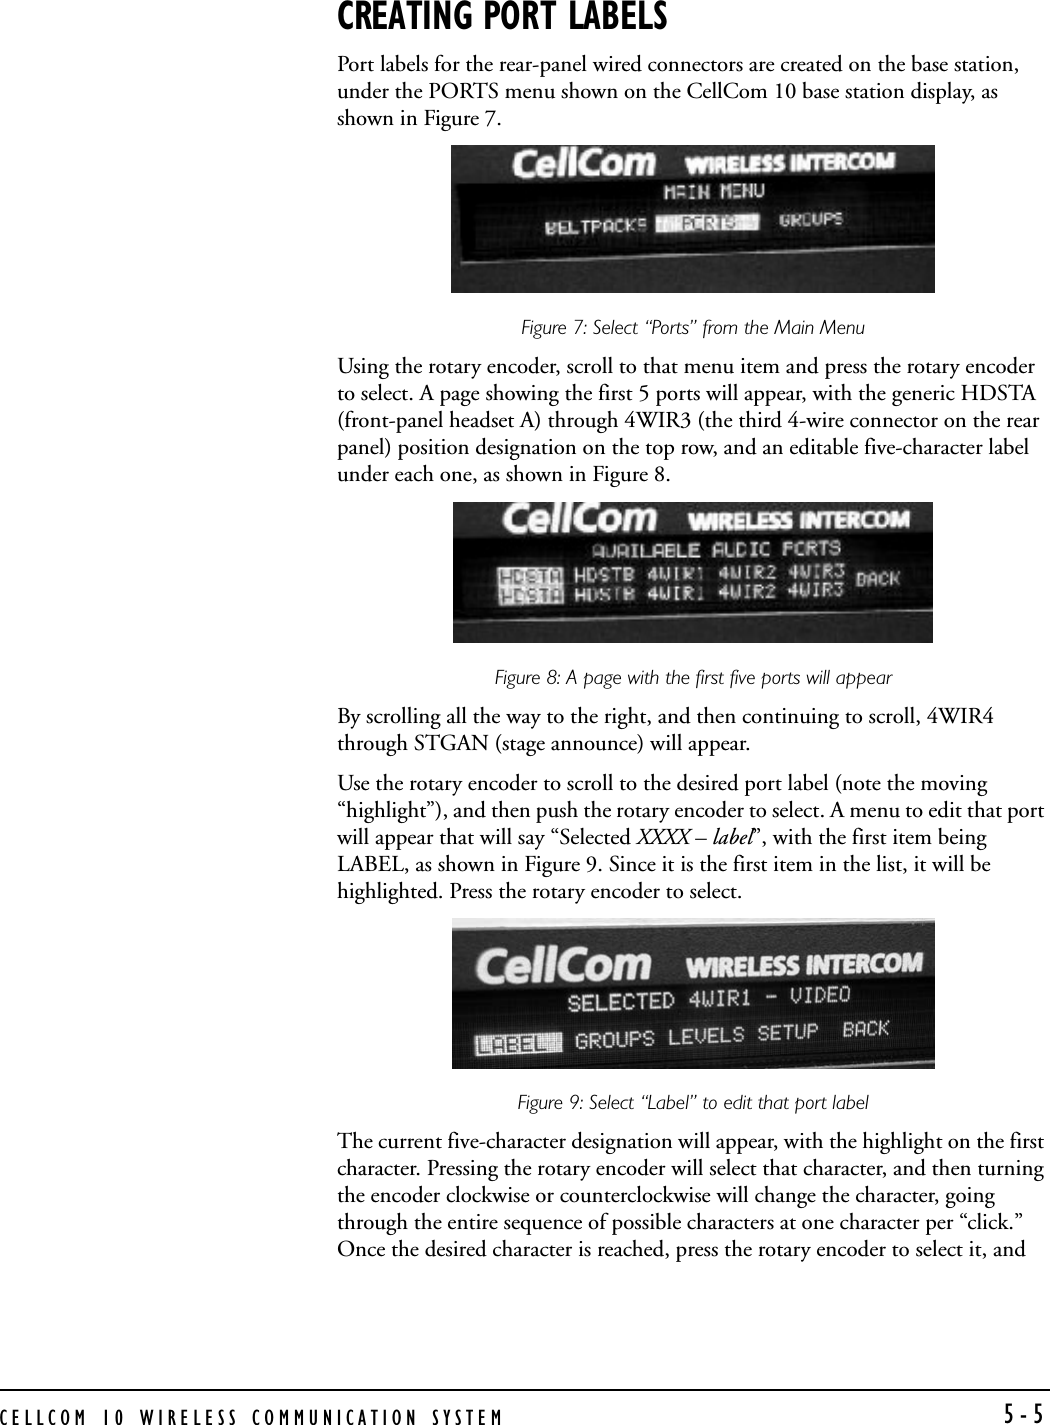 CELLCOM 10 WIRELESS COMMUNICATION SYSTEM 5-5CREATING PORT LABELSPort labels for the rear-panel wired connectors are created on the base station, under the PORTS menu shown on the CellCom 10 base station display, as shown in Figure 7.Figure 7: Select “Ports” from the Main MenuUsing the rotary encoder, scroll to that menu item and press the rotary encoder to select. A page showing the first 5 ports will appear, with the generic HDSTA (front-panel headset A) through 4WIR3 (the third 4-wire connector on the rear panel) position designation on the top row, and an editable five-character label under each one, as shown in Figure 8.Figure 8: A page with the first five ports will appearBy scrolling all the way to the right, and then continuing to scroll, 4WIR4 through STGAN (stage announce) will appear. Use the rotary encoder to scroll to the desired port label (note the moving “highlight”), and then push the rotary encoder to select. A menu to edit that port will appear that will say “Selected XXXX – label”, with the first item being LABEL, as shown in Figure 9. Since it is the first item in the list, it will be highlighted. Press the rotary encoder to select.Figure 9: Select “Label” to edit that port label The current five-character designation will appear, with the highlight on the first character. Pressing the rotary encoder will select that character, and then turning the encoder clockwise or counterclockwise will change the character, going through the entire sequence of possible characters at one character per “click.” Once the desired character is reached, press the rotary encoder to select it, and 